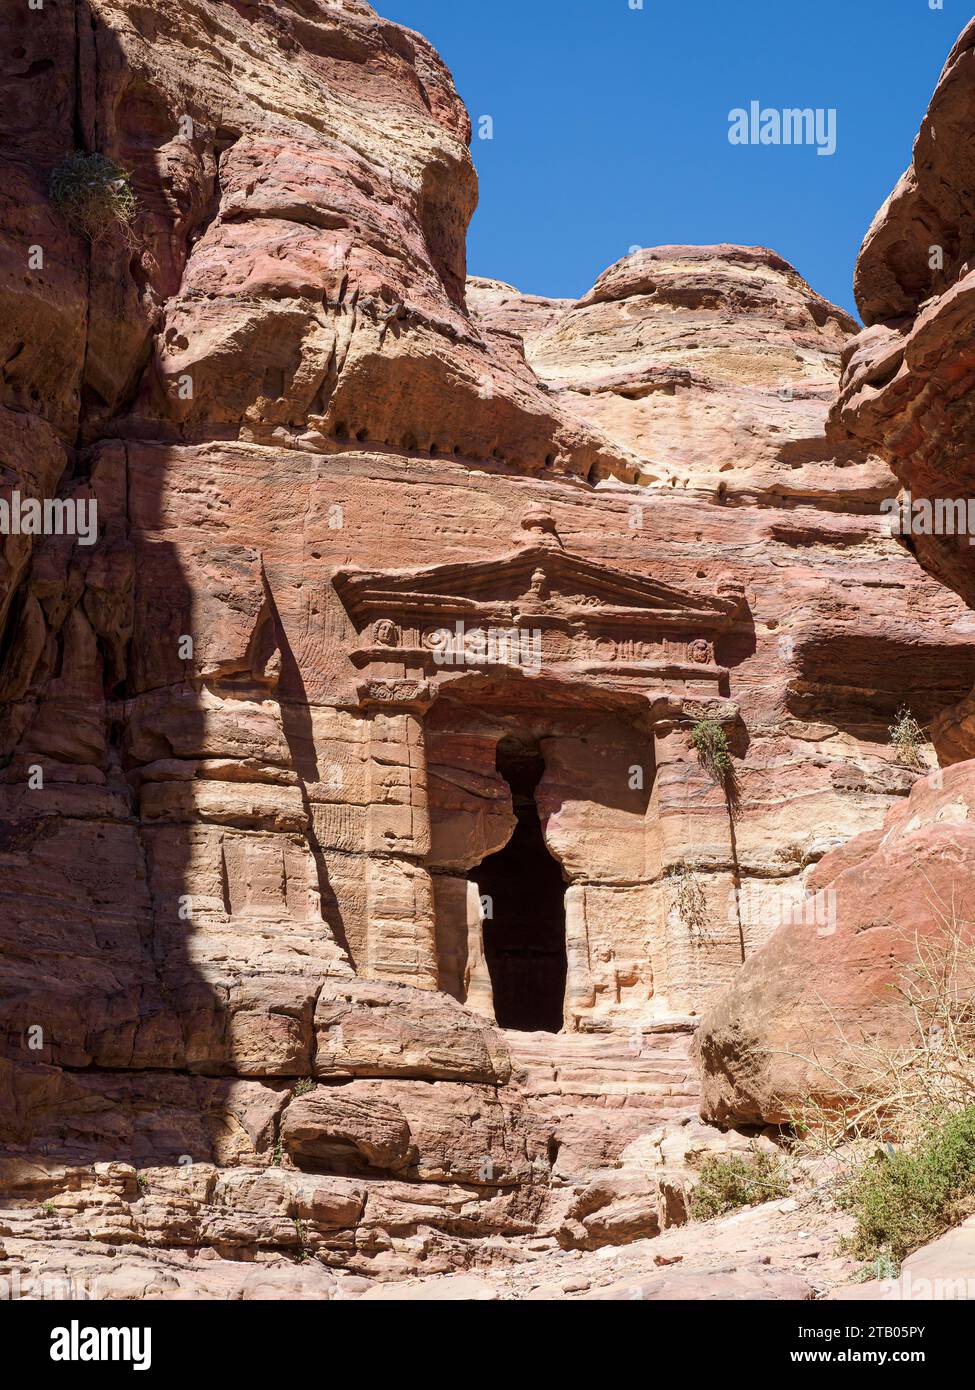 The Temple of the Winged Lions, Petra Archaeological Park, a UNESCO World Heritage Site, 7 New Wonders of the World, Jordan. Stock Photo